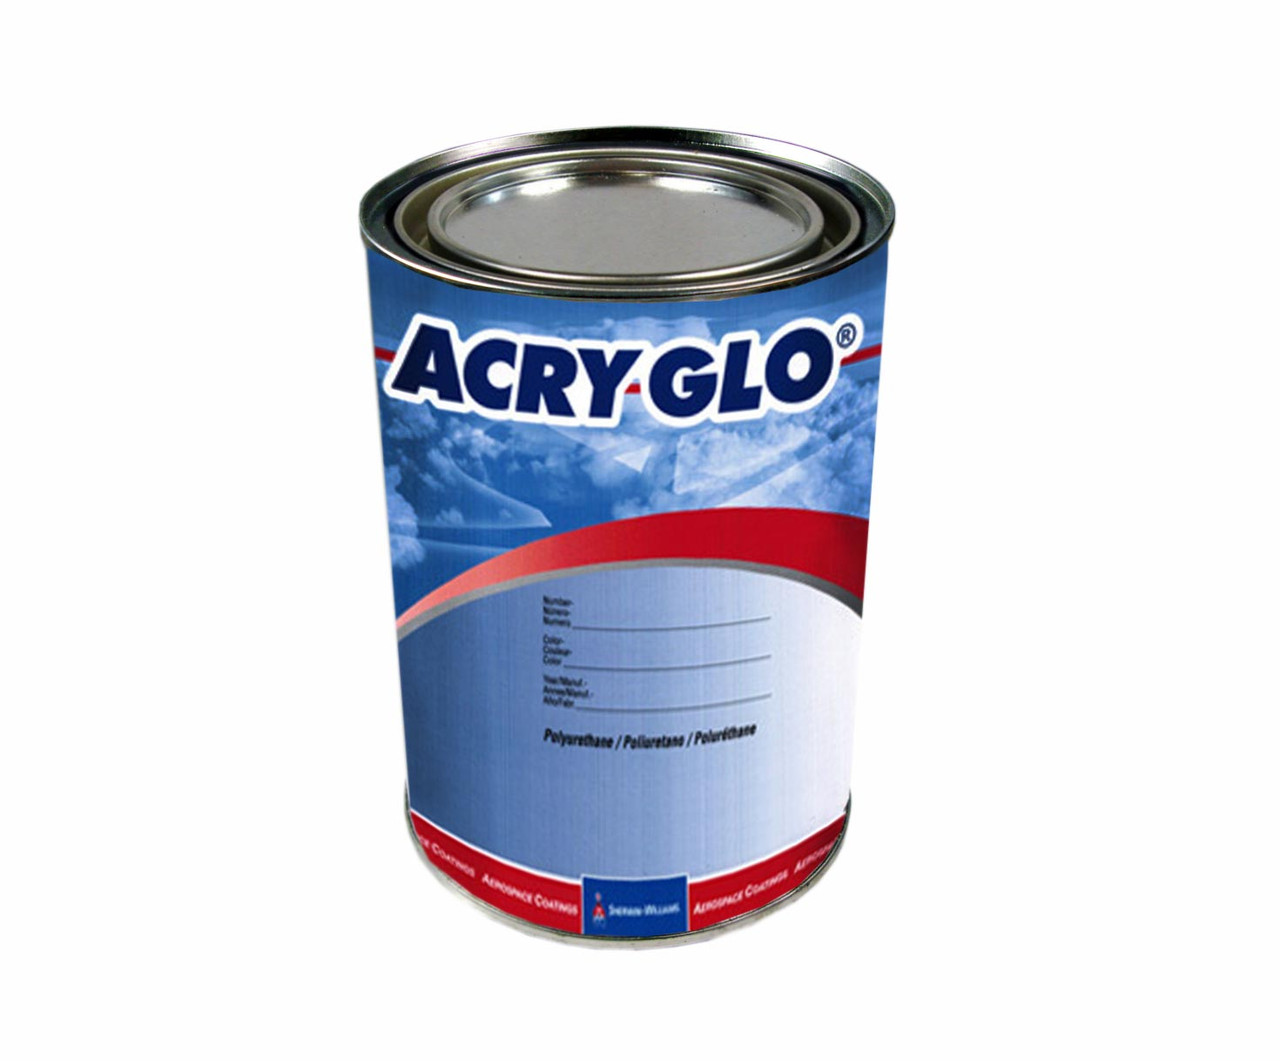 Sherwin-Williams H10640 ACRY GLO Conventional Metallic Ice Silver Acrylic  Urethane Paint - 3/4 Quart at